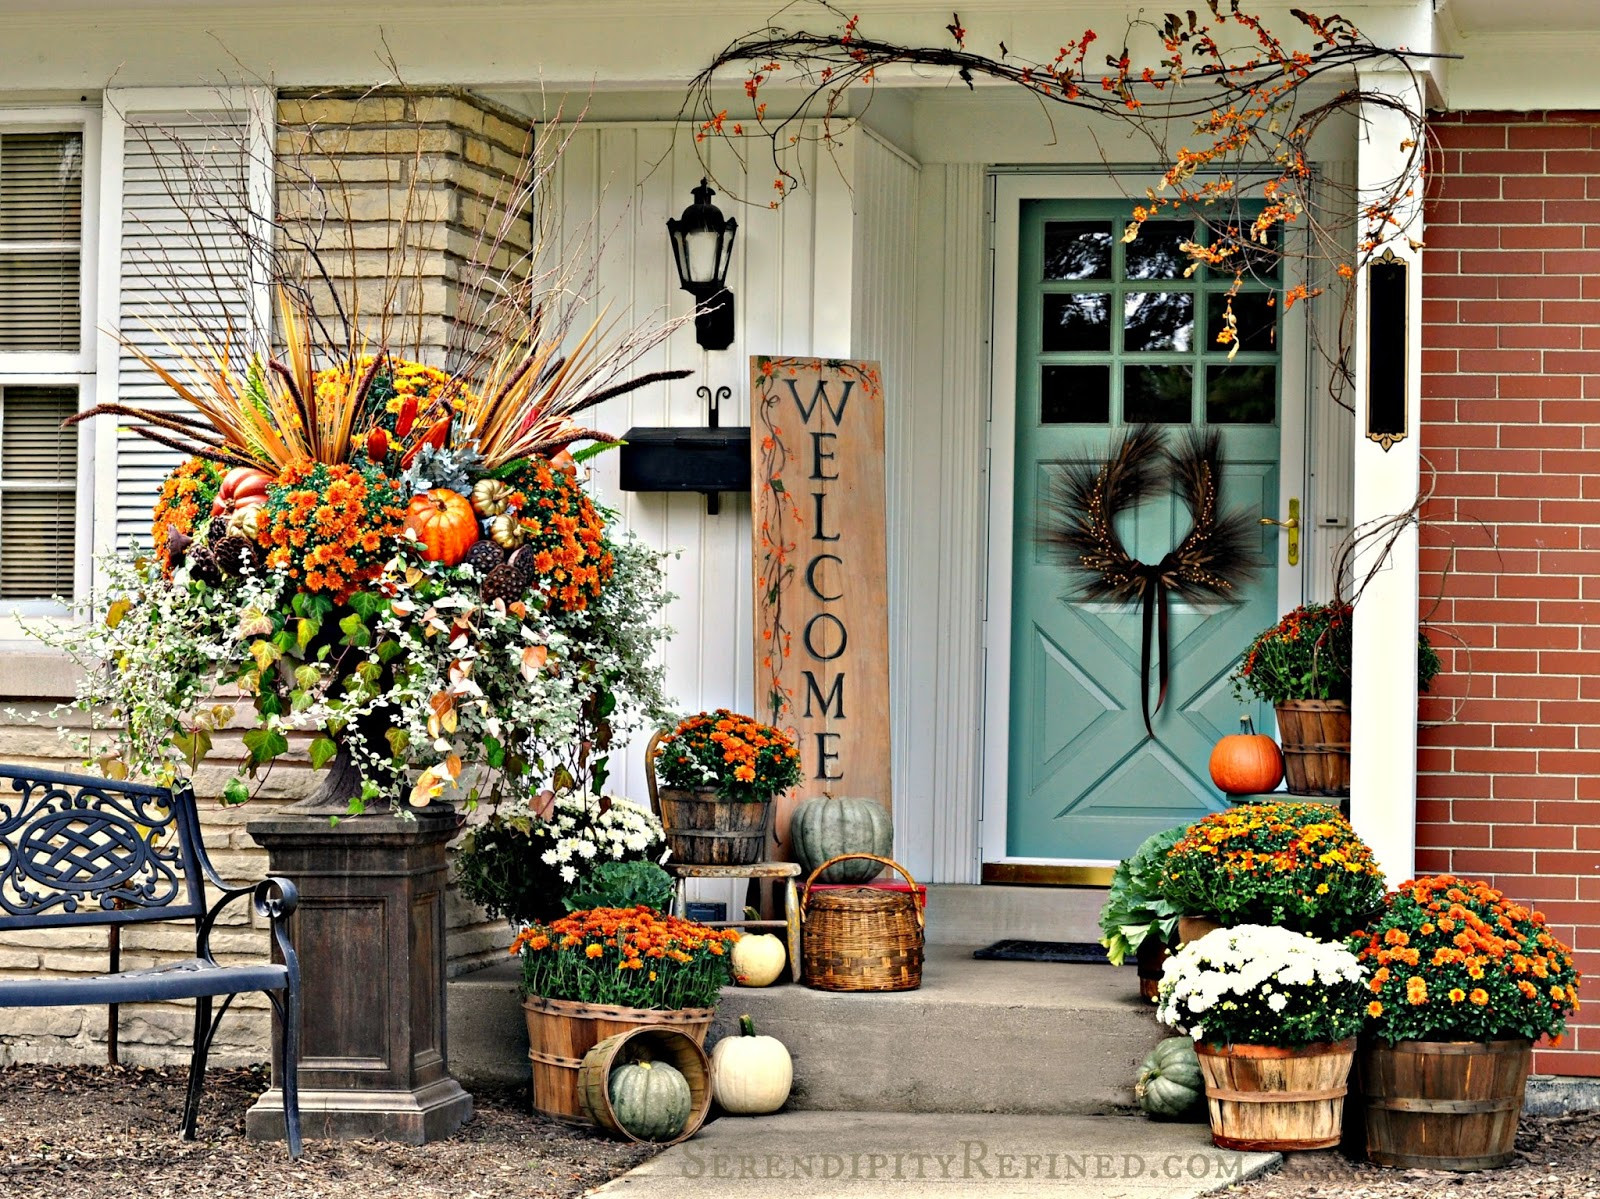 Fall Decoration For Porch
 Serendipity Refined Blog Fall Harvest Porch Decor with